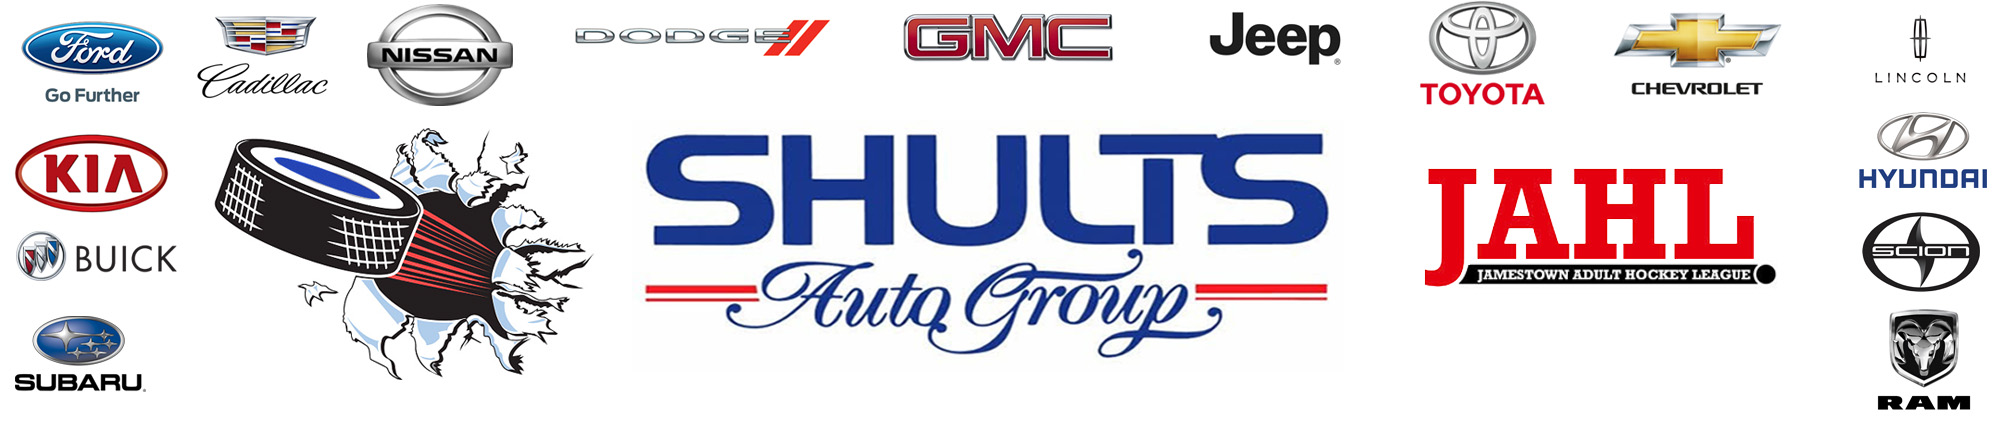 Shults Autogroup